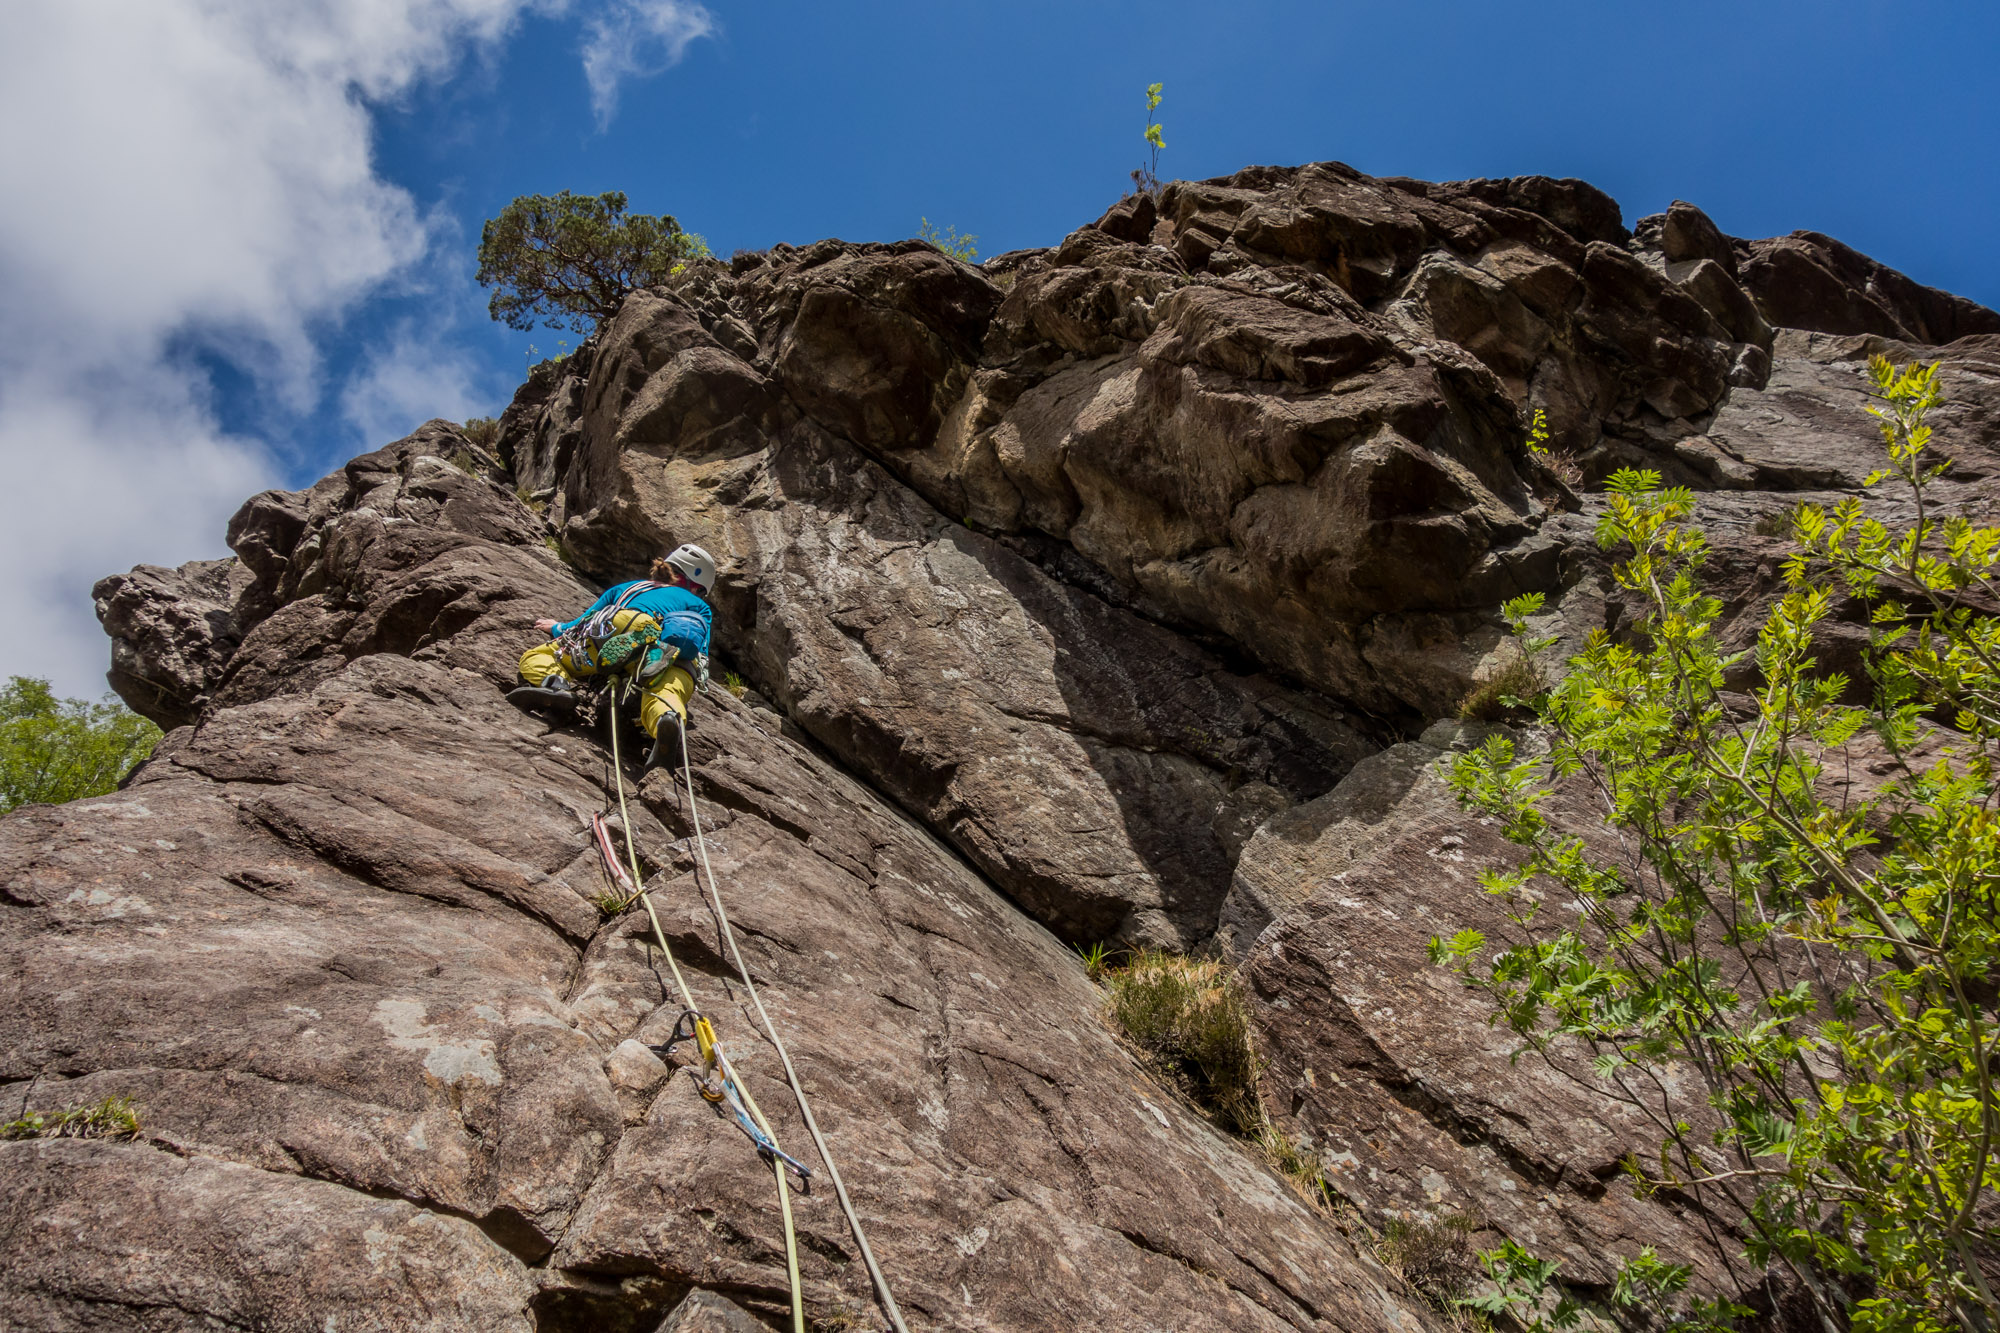 A classic of the crags and one of the best single pitch VS routes we've done - Resurrection 